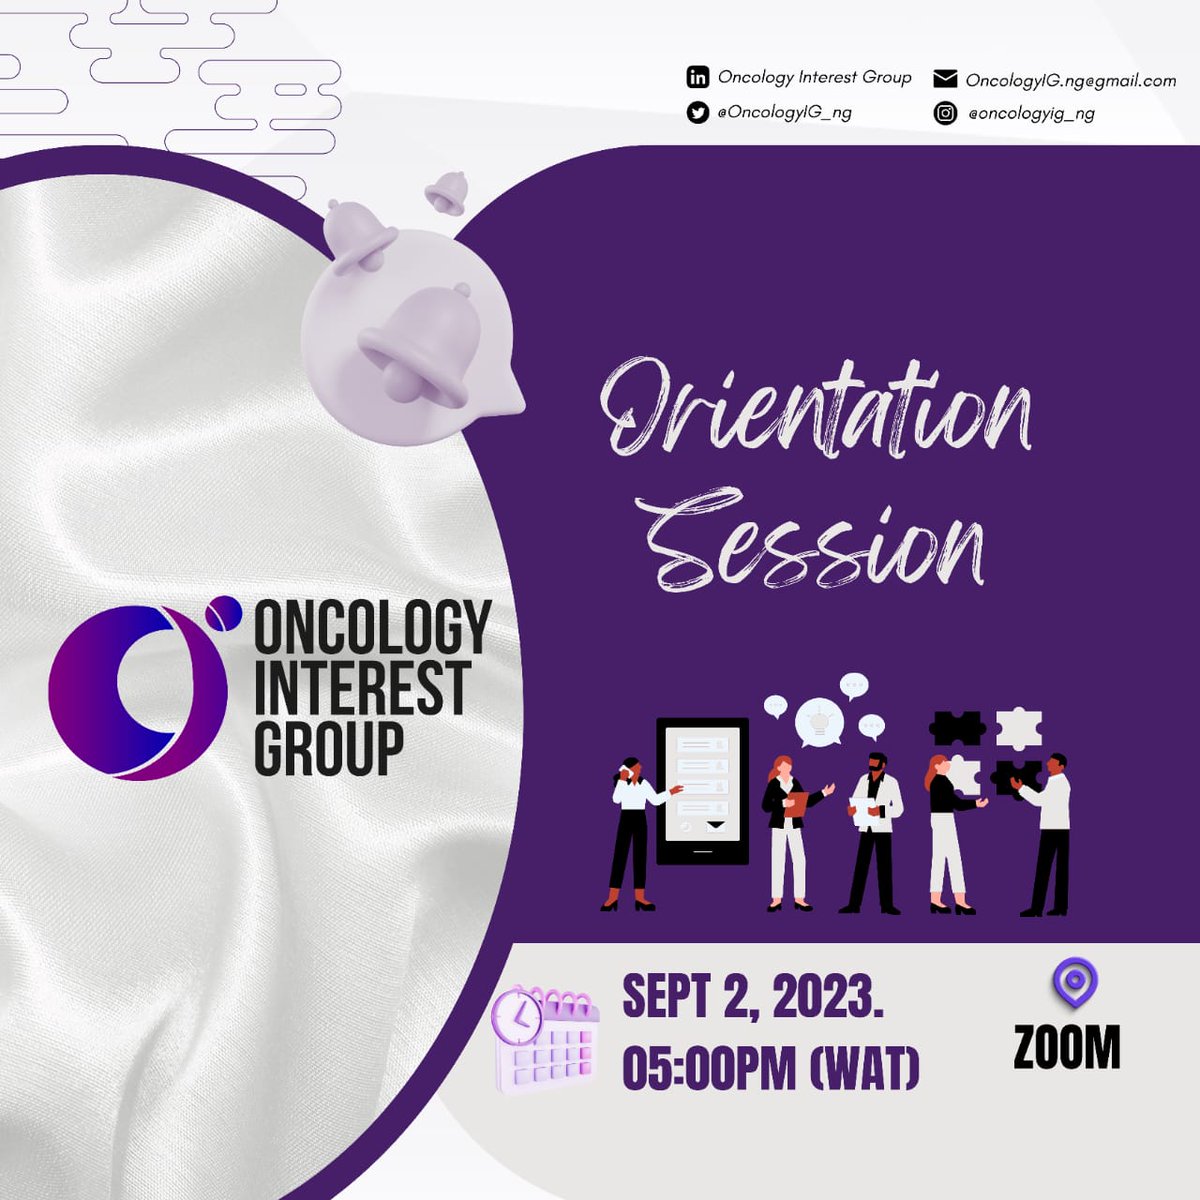 Exciting news! We've launched the 2023/2024 cycle with an incredible onboarding session. Welcoming new and returning members to our close-knit oncology community. 

#OIGNigeria #OncologyCommunity #OncologyInterestGroup